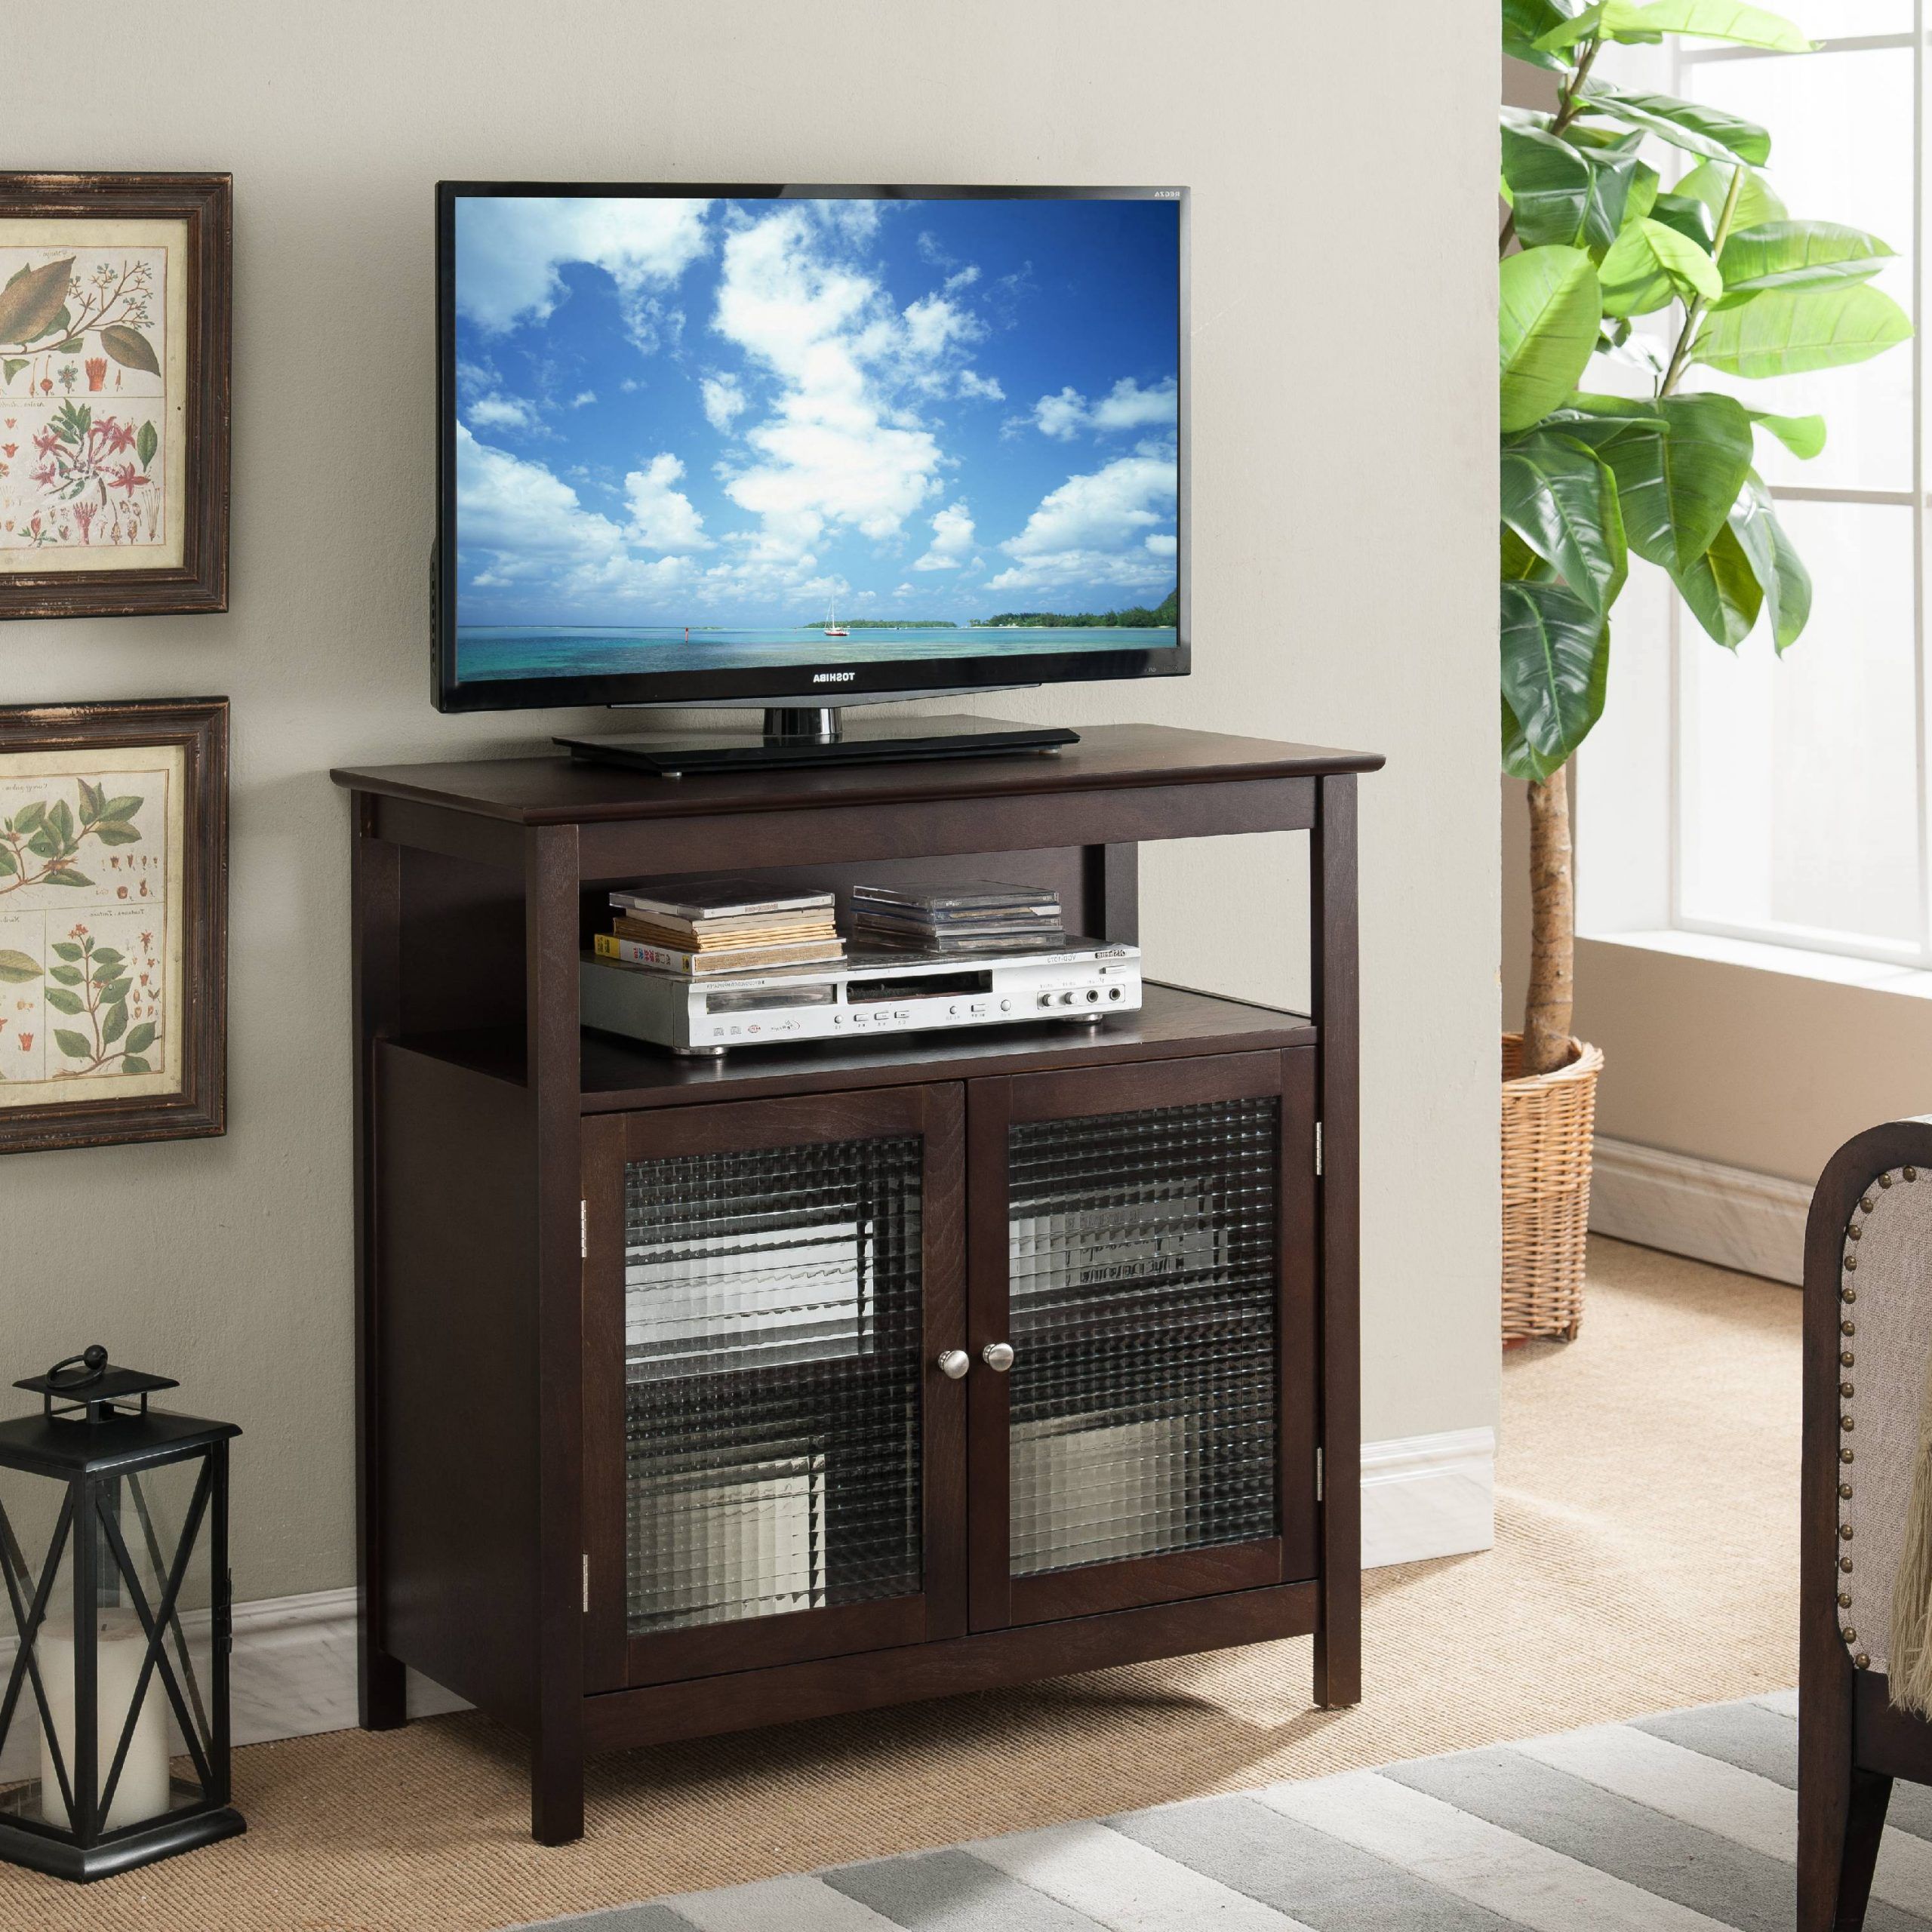 Kamila 32" Walnut Wood Contemporary Entertainment Center Regarding Glass Tv Cabinets With Doors (View 4 of 15)